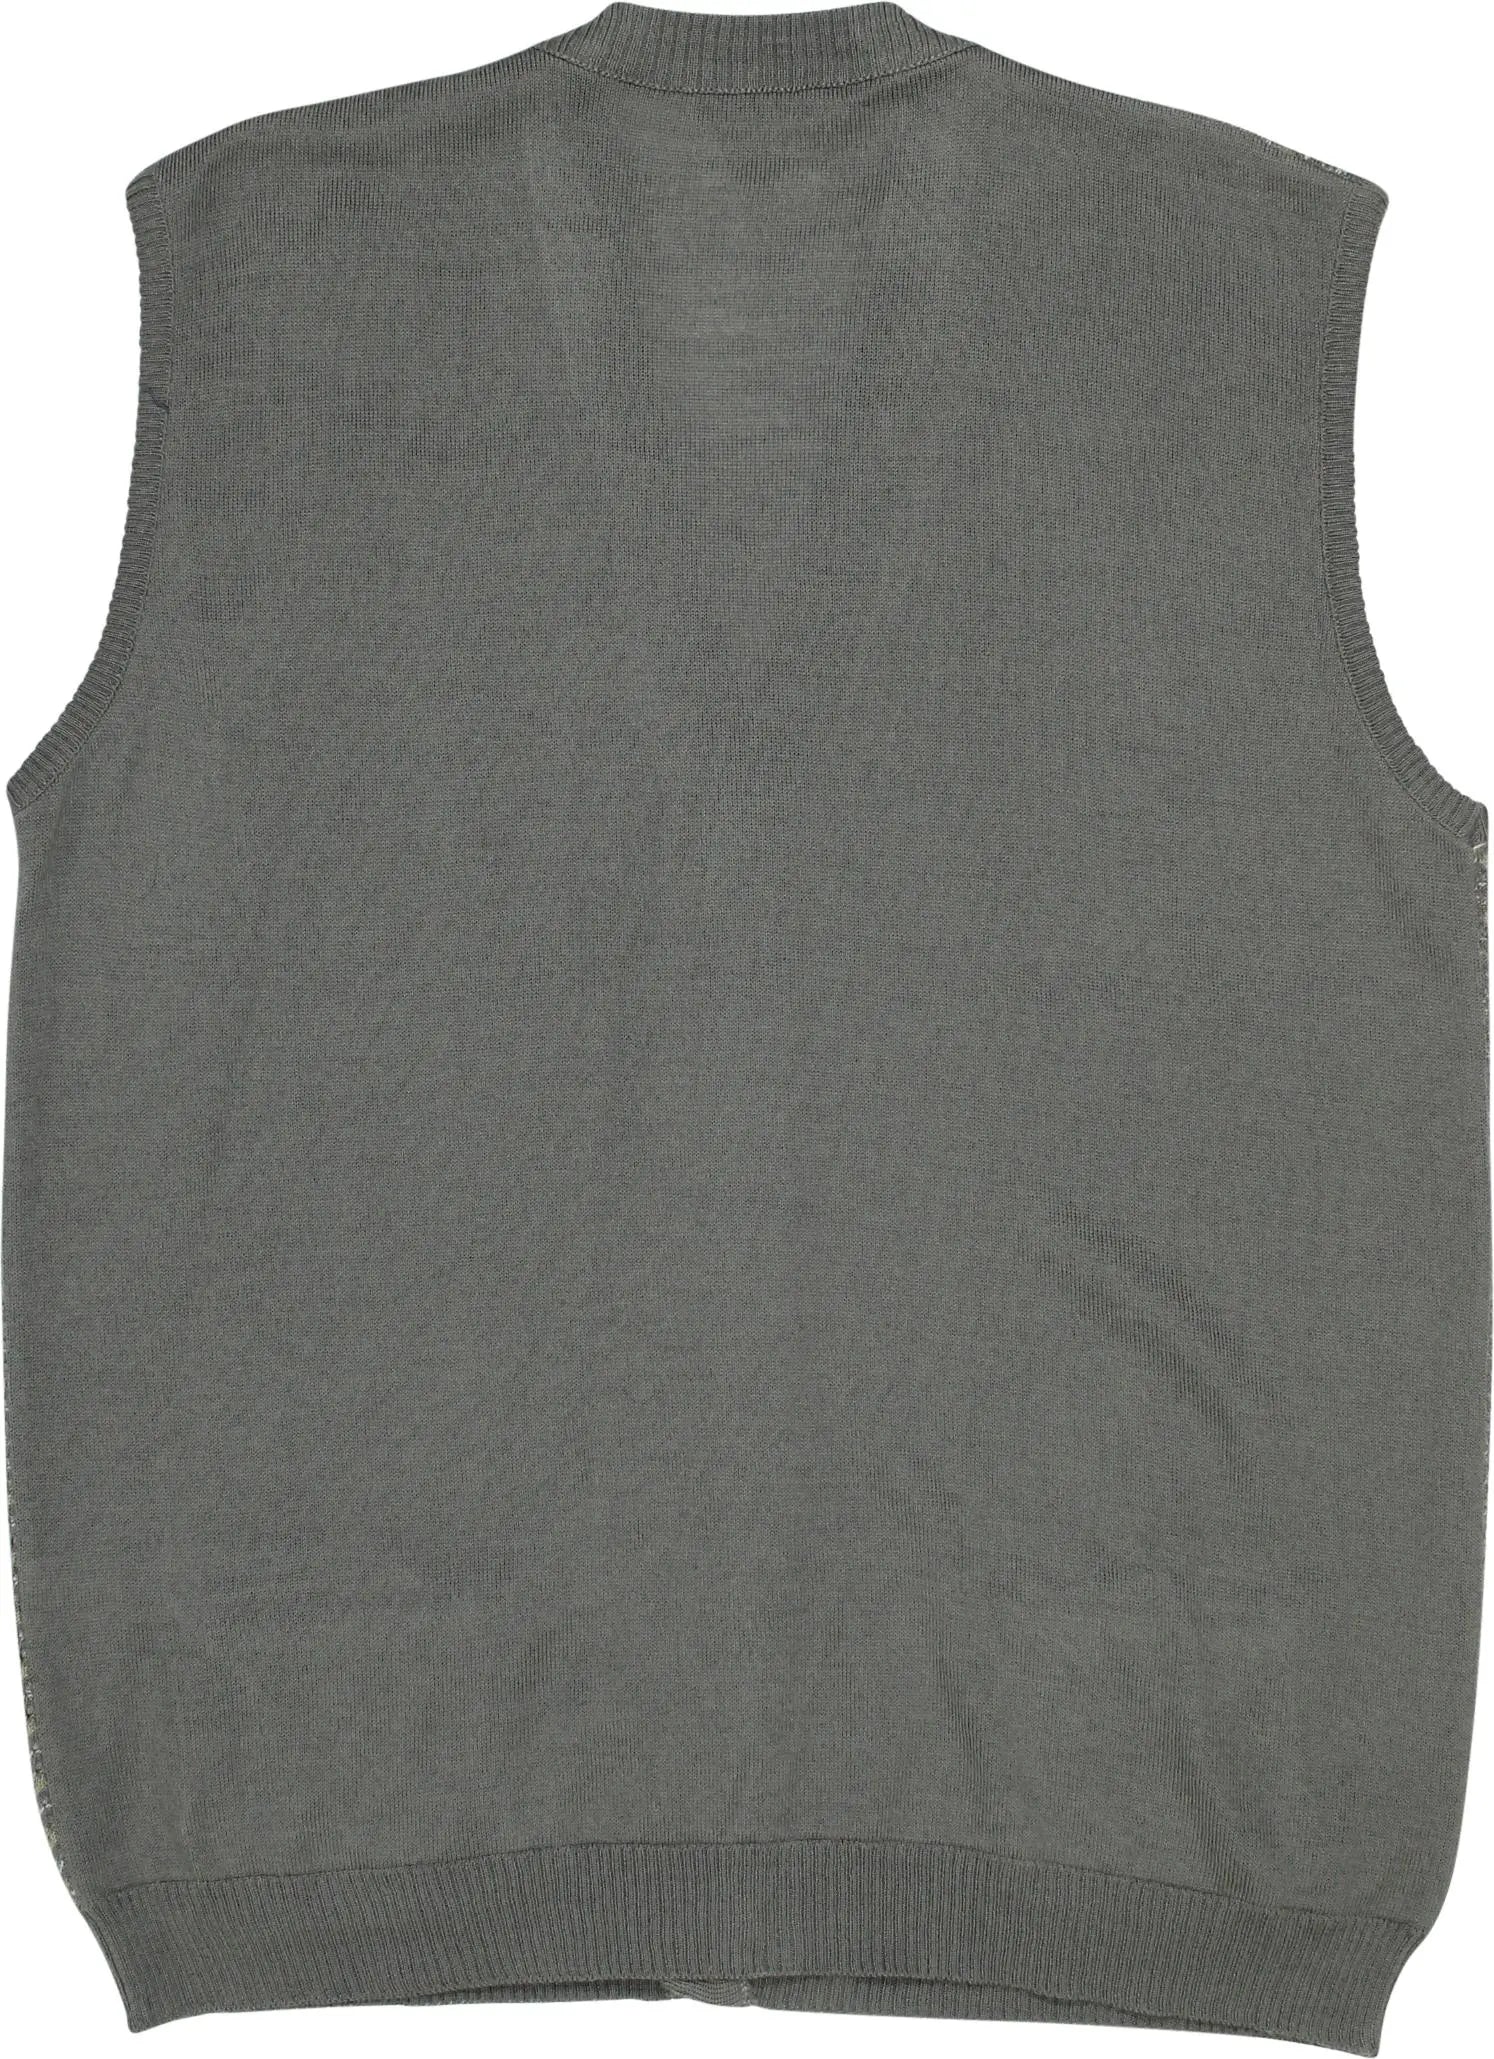 Bernardini - Grey Patterned Vest with Buttons- ThriftTale.com - Vintage and second handclothing